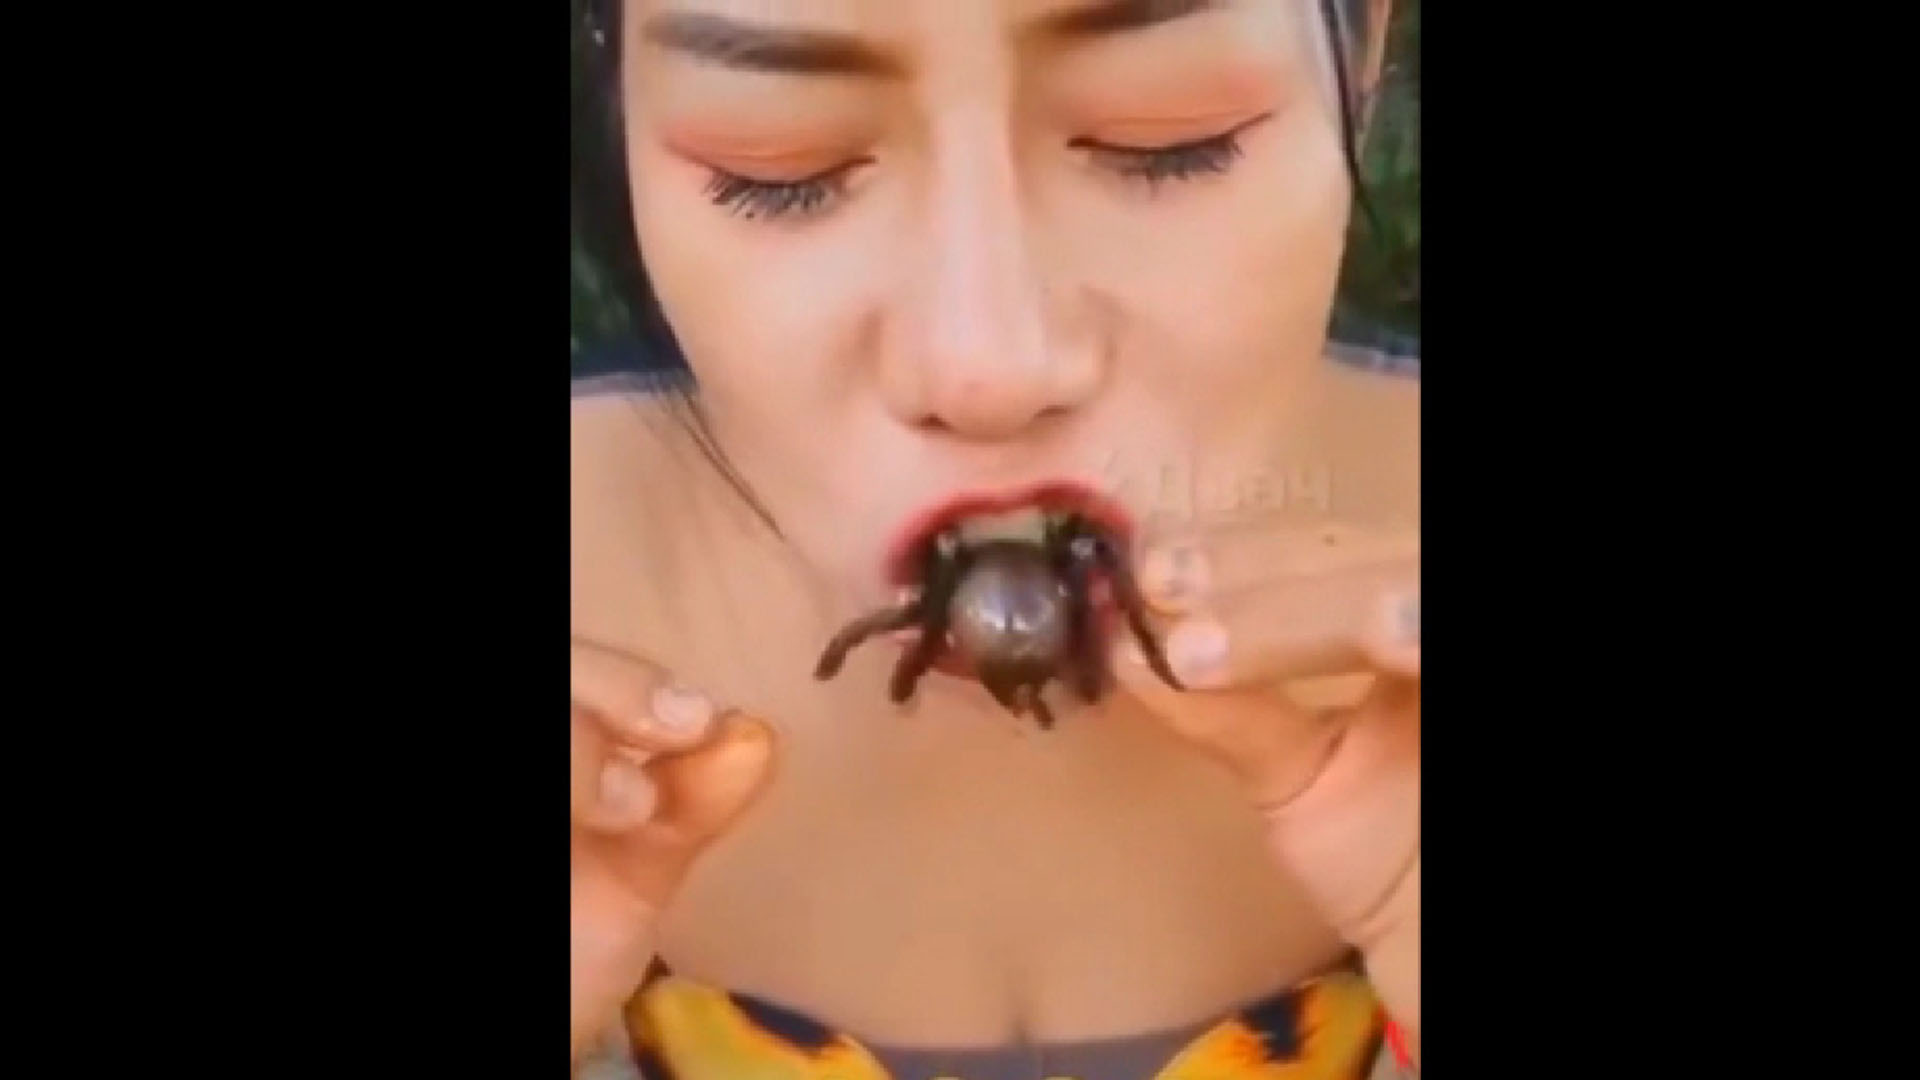 Girls eatig Insects  (─‿‿─)